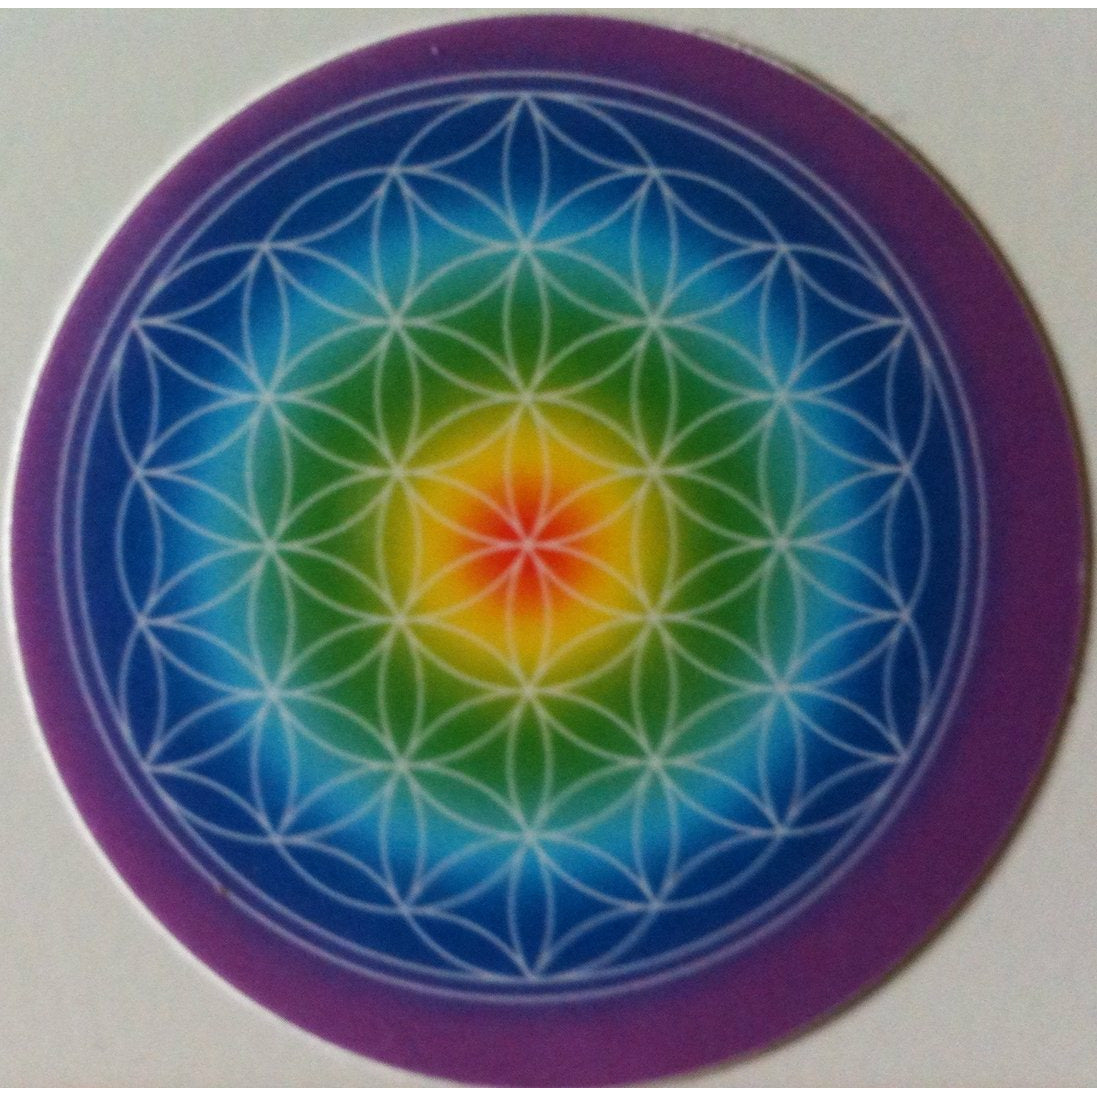 The flower of life - Sticker Chakra colors